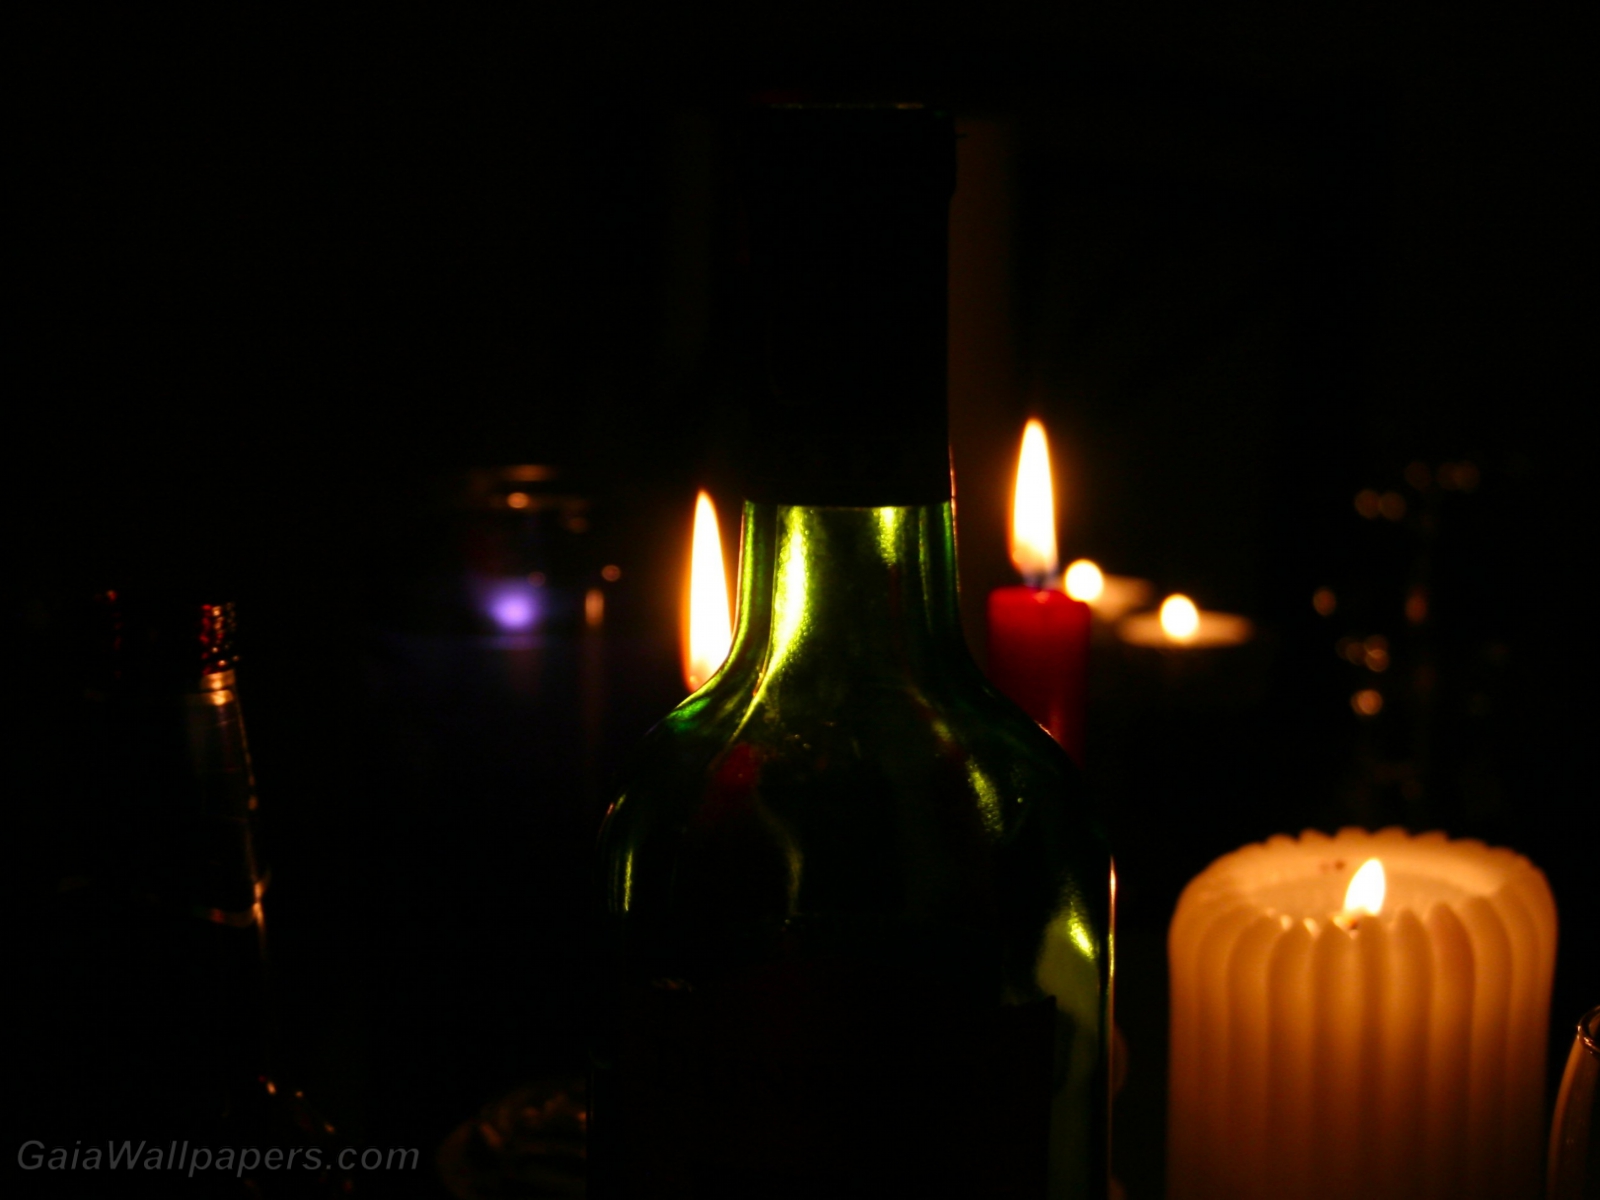 Candles and bottles - Free desktop wallpapers